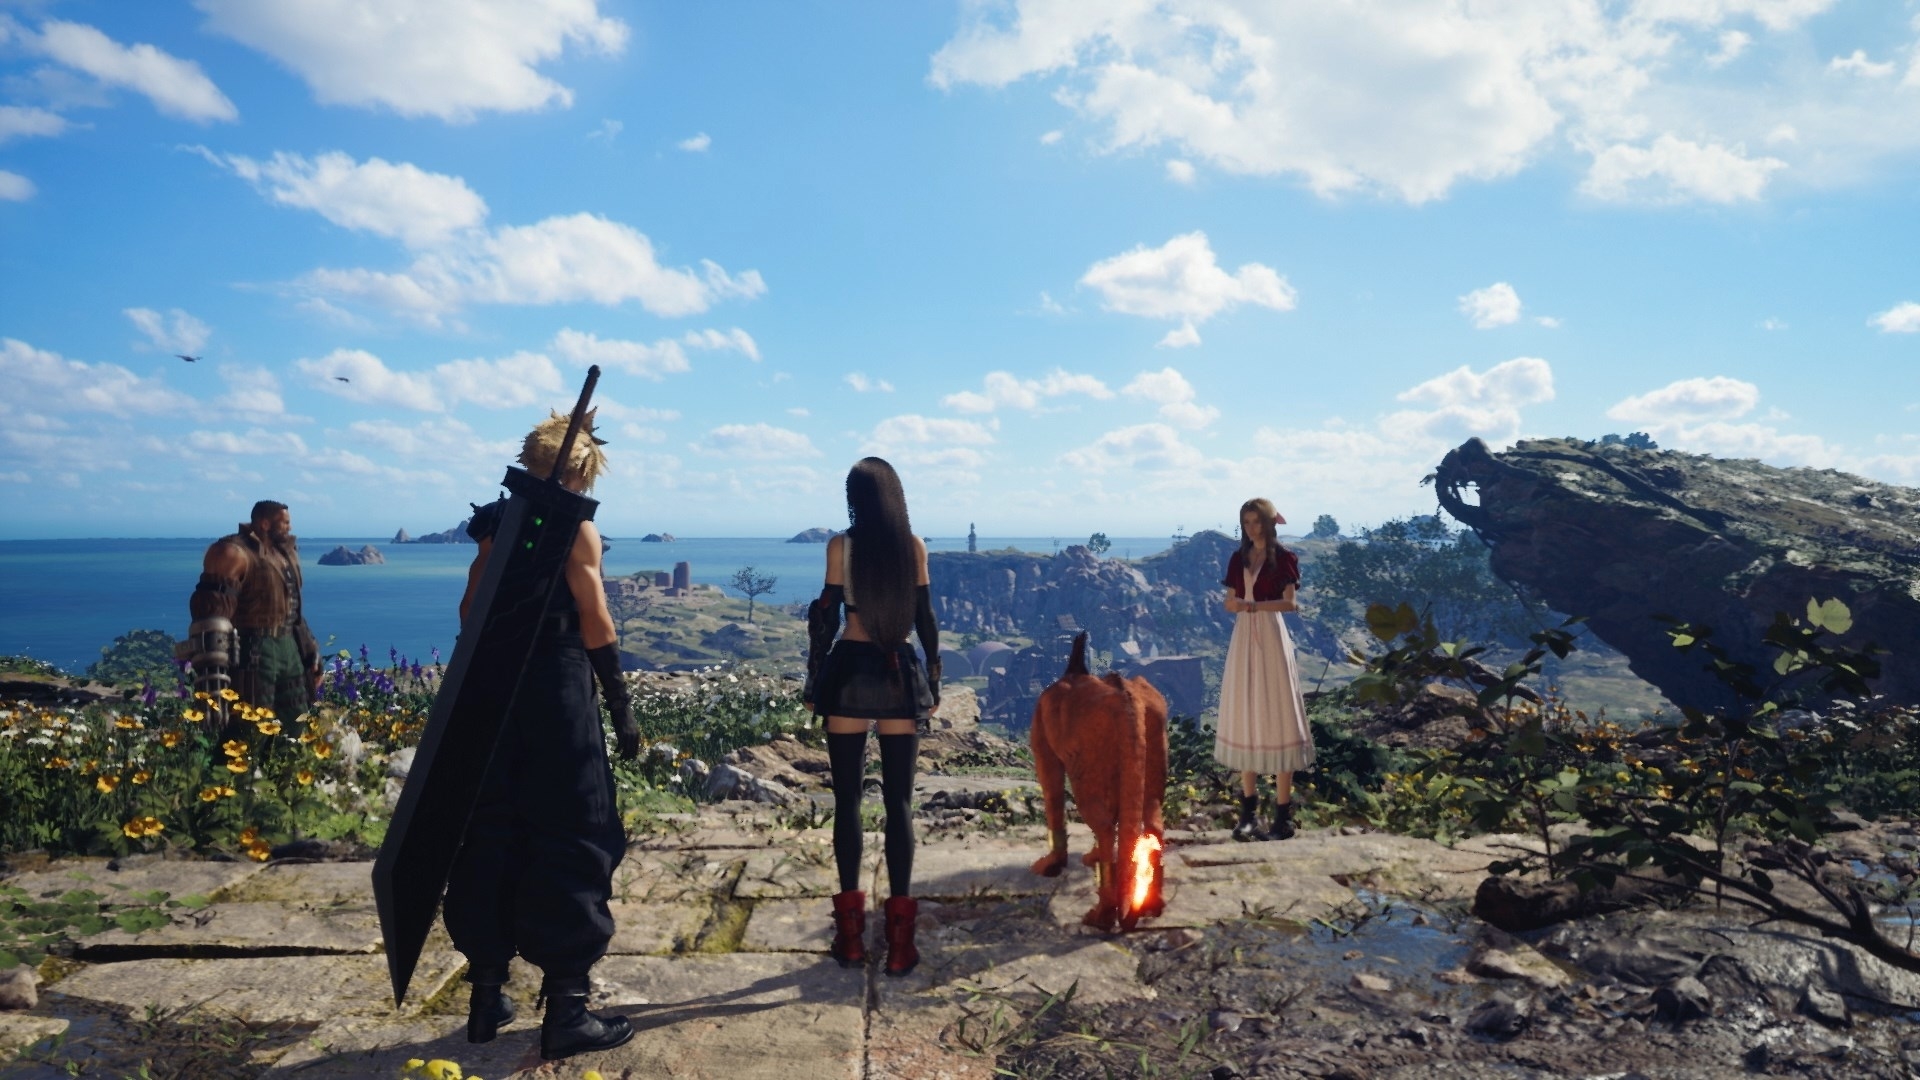 Cloud, Tifa, Aerith, Red 13, and Barrett standing on a cliff overlooking the open world